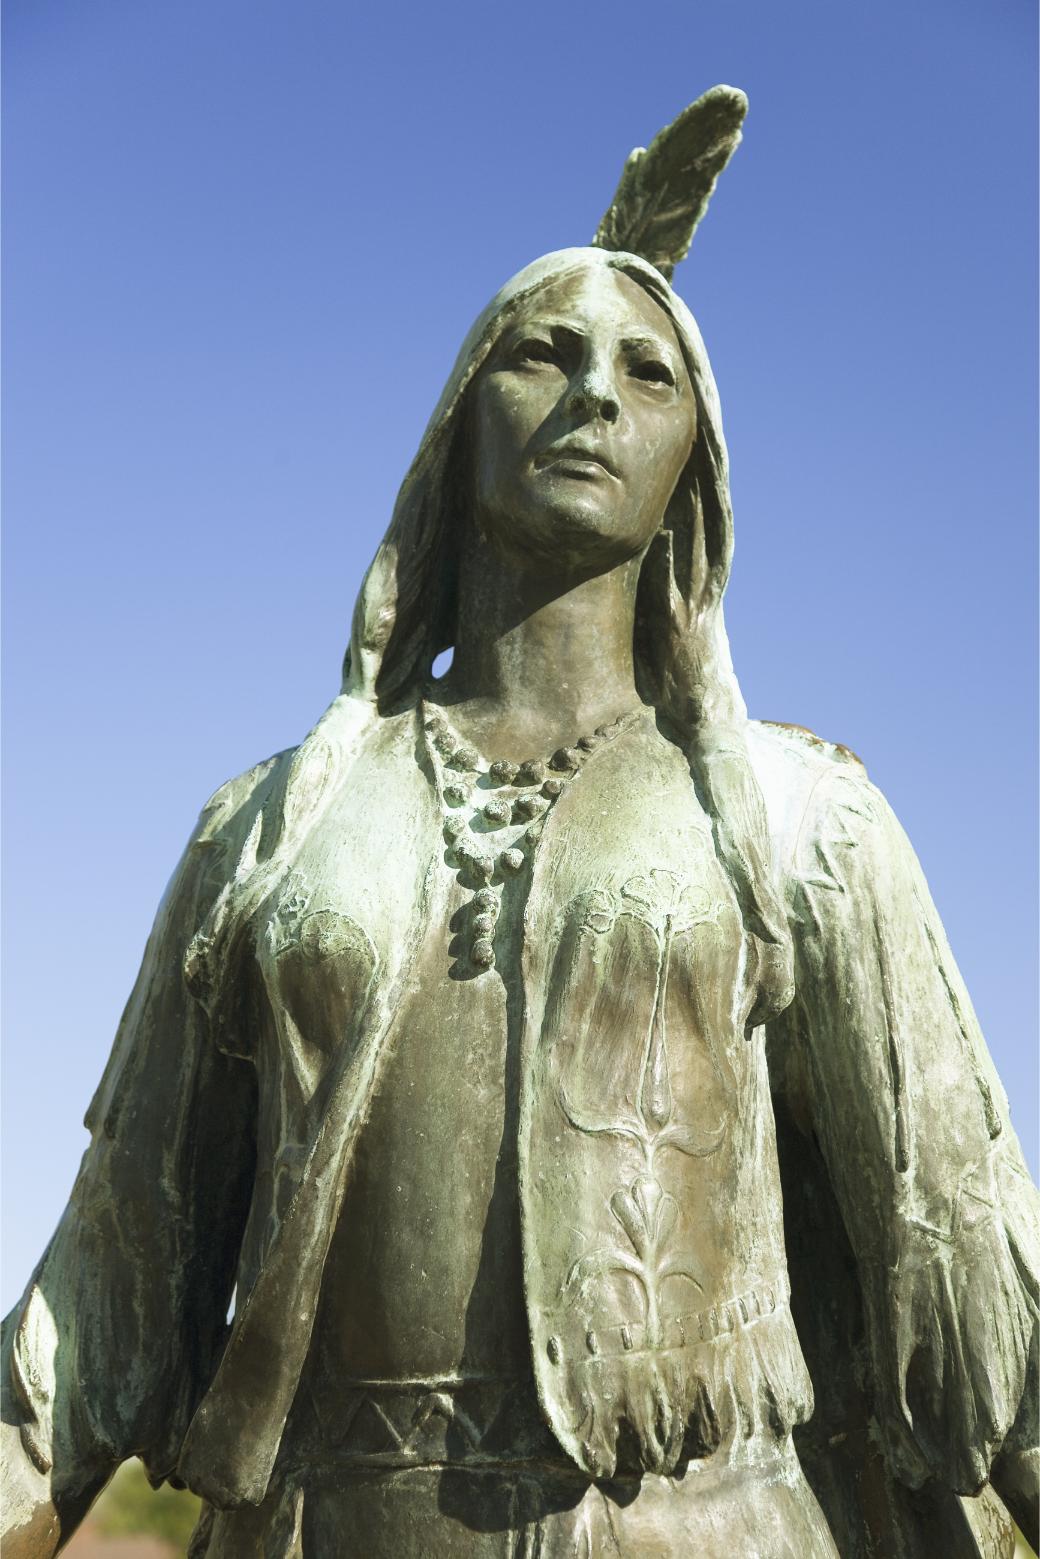 Pocahontas is perhaps the most famous of the Powhatan Indians.